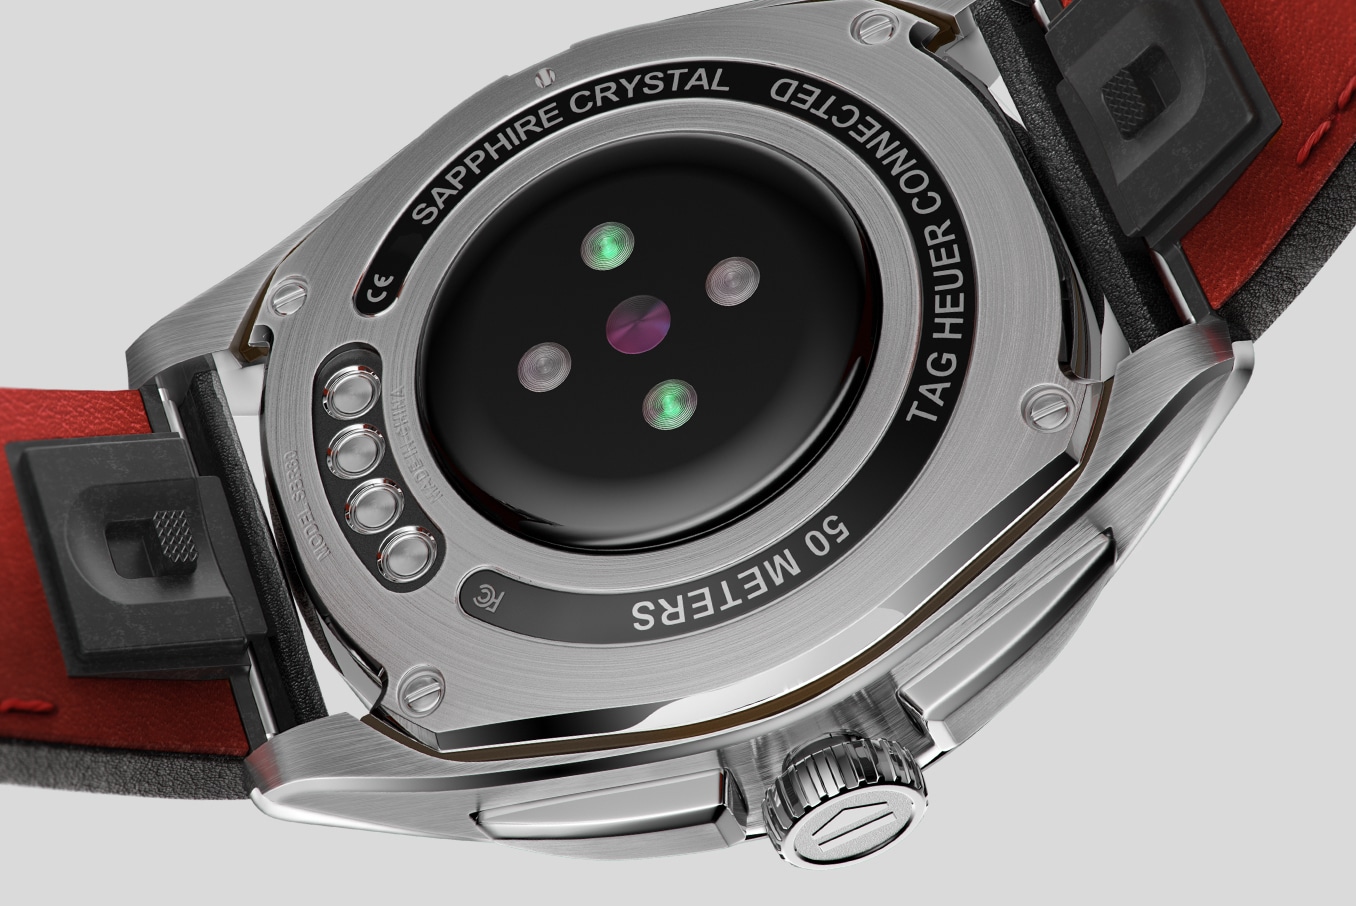 LVMH's TAG Heuer has plans for smartwatch: paper